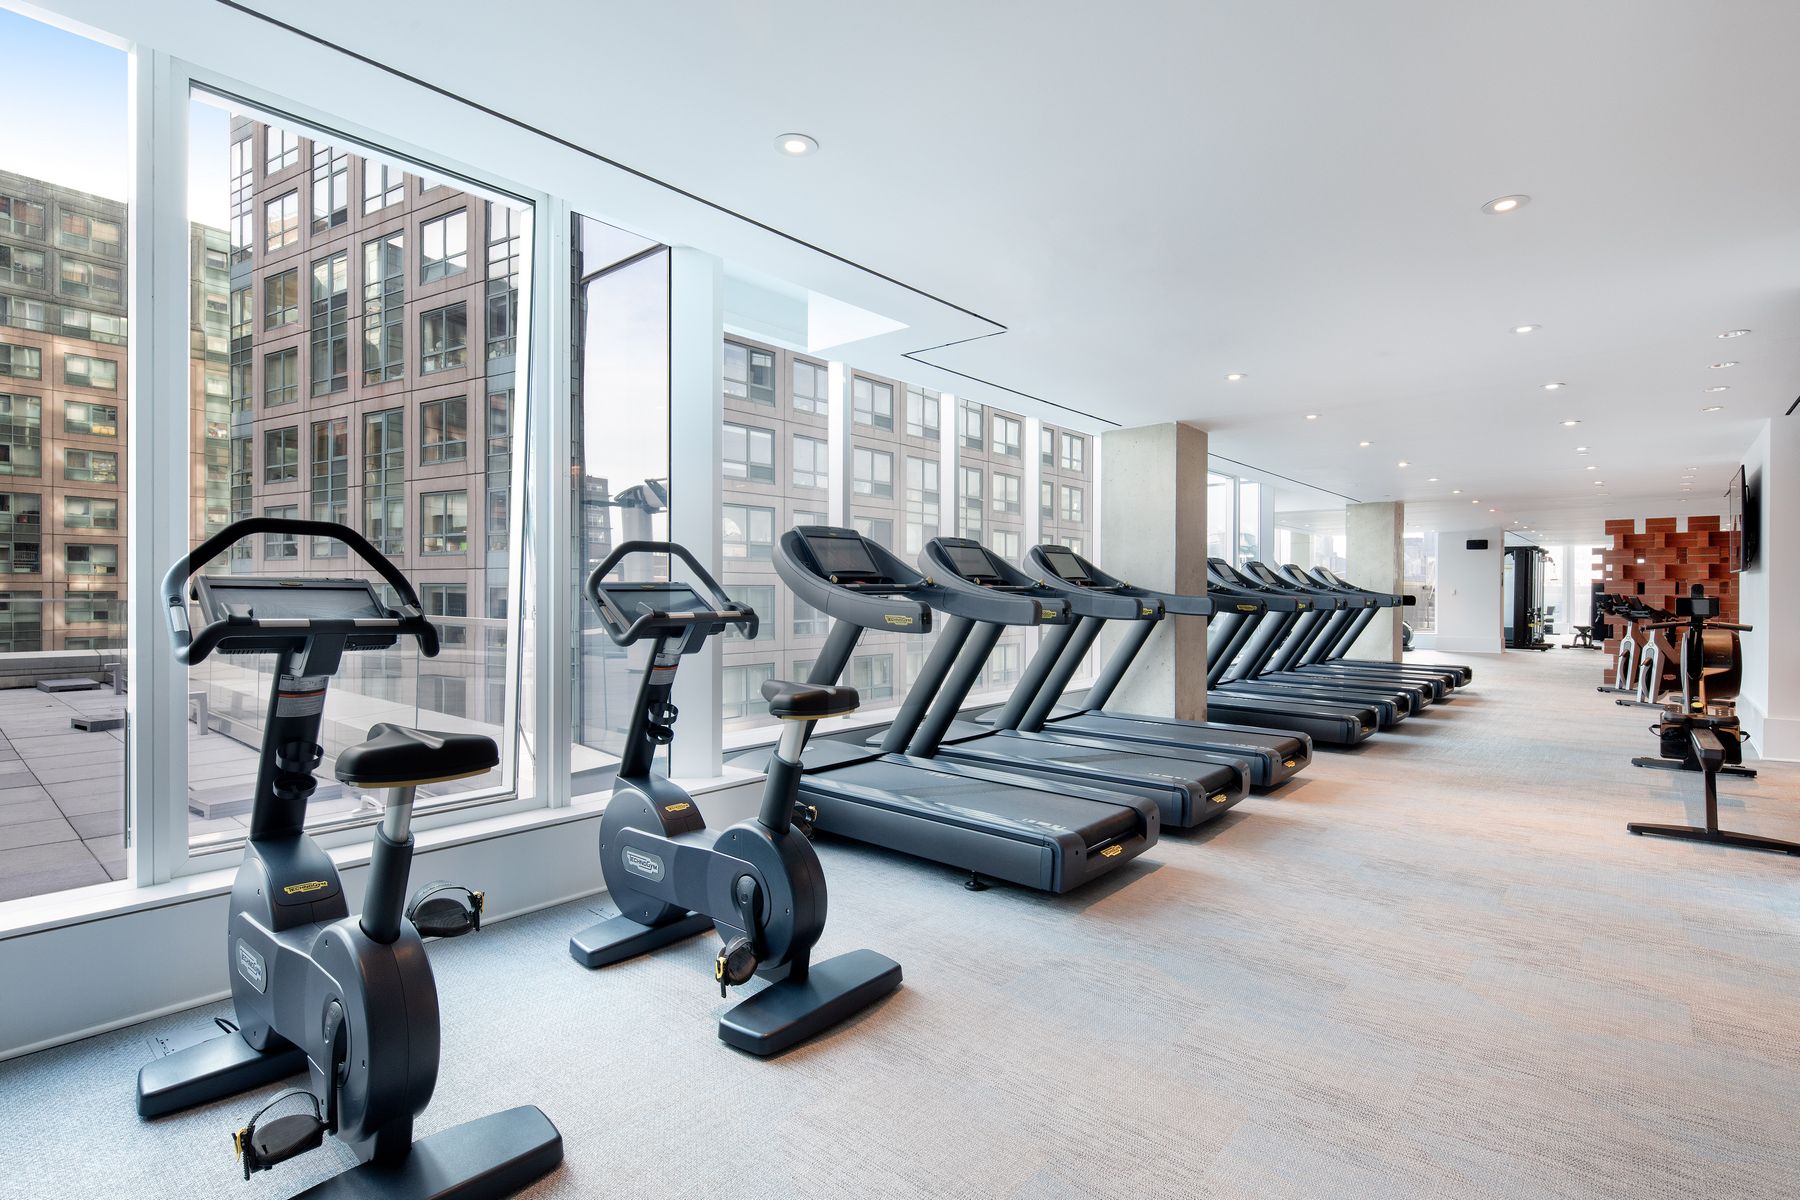 420 Kent - Fitness Center, bright with large windowed wall, ample treadmills, stationary bikes and other fitness equipment